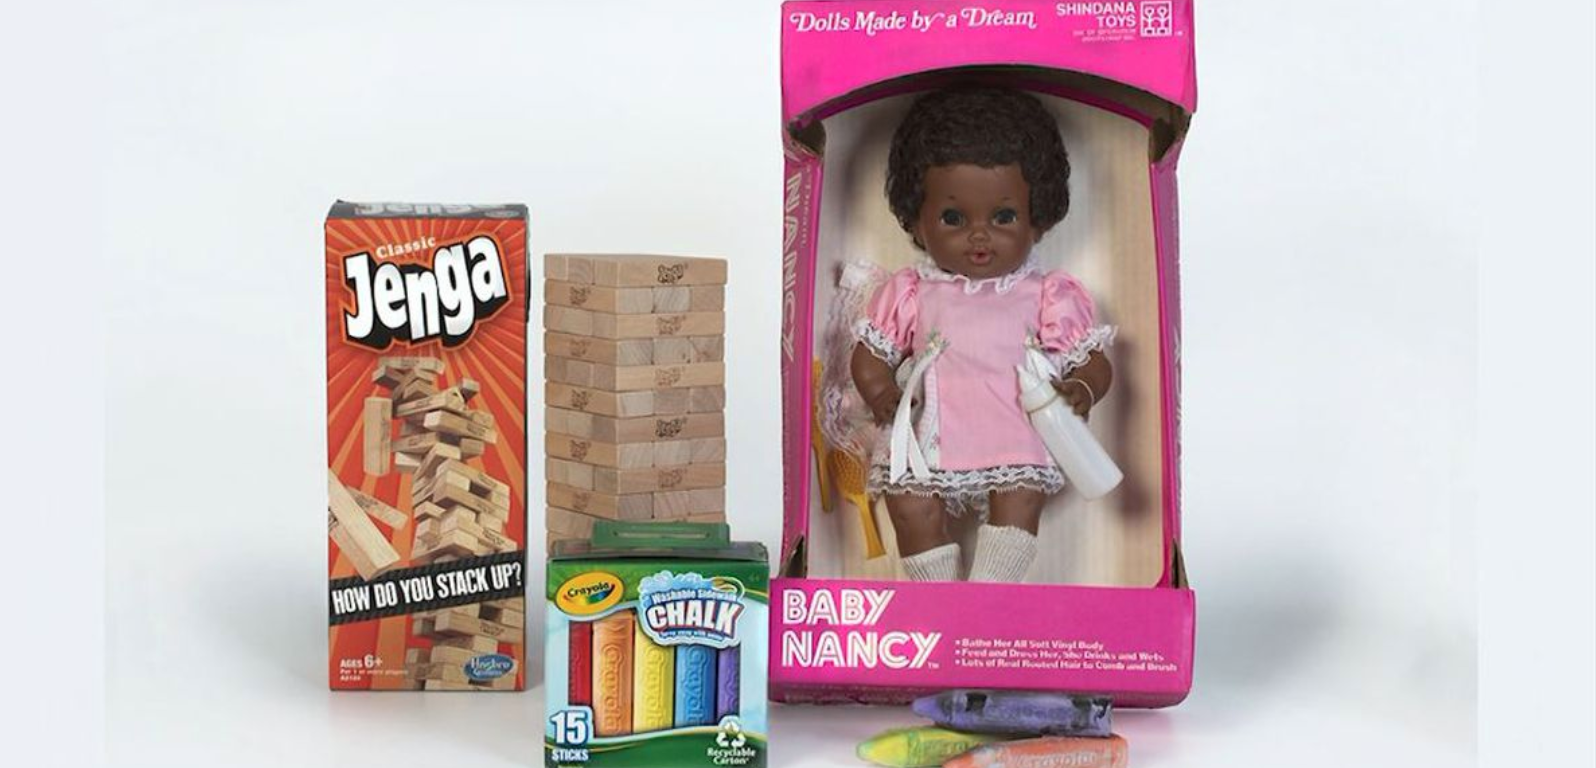 Iconic Doll Inducted Into National Toy Hall of Fame